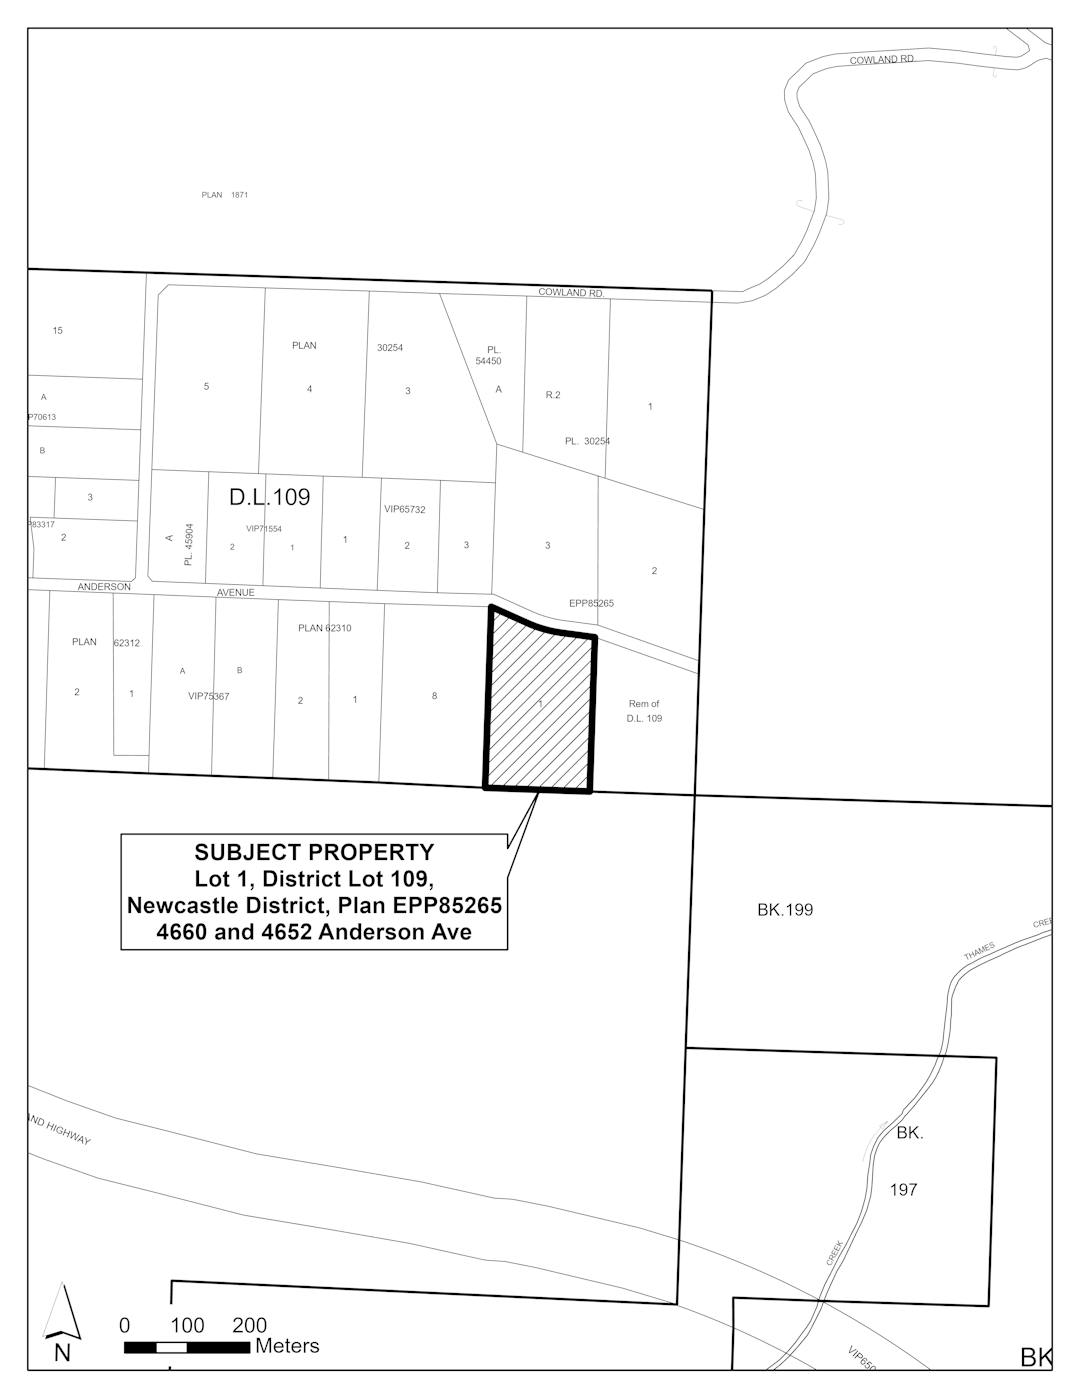 The RDN is currently looking for your input on zoning amendment application PL2020-126.